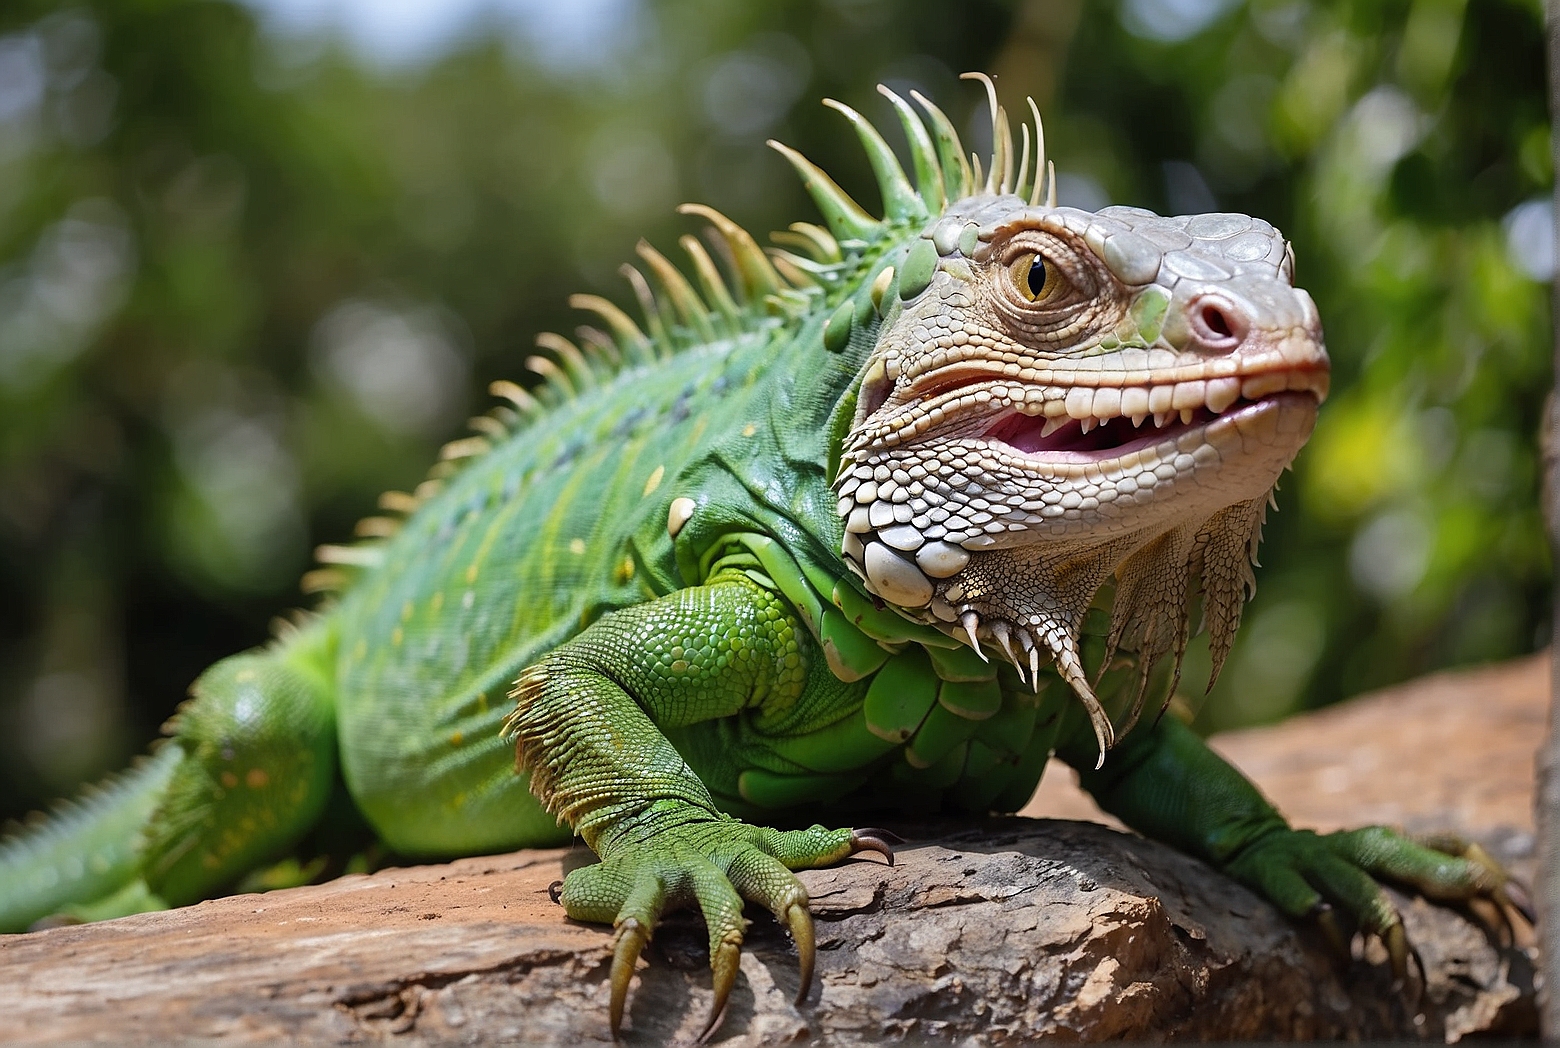 The Diet of Green Iguanas: What Do They Like to Eat?